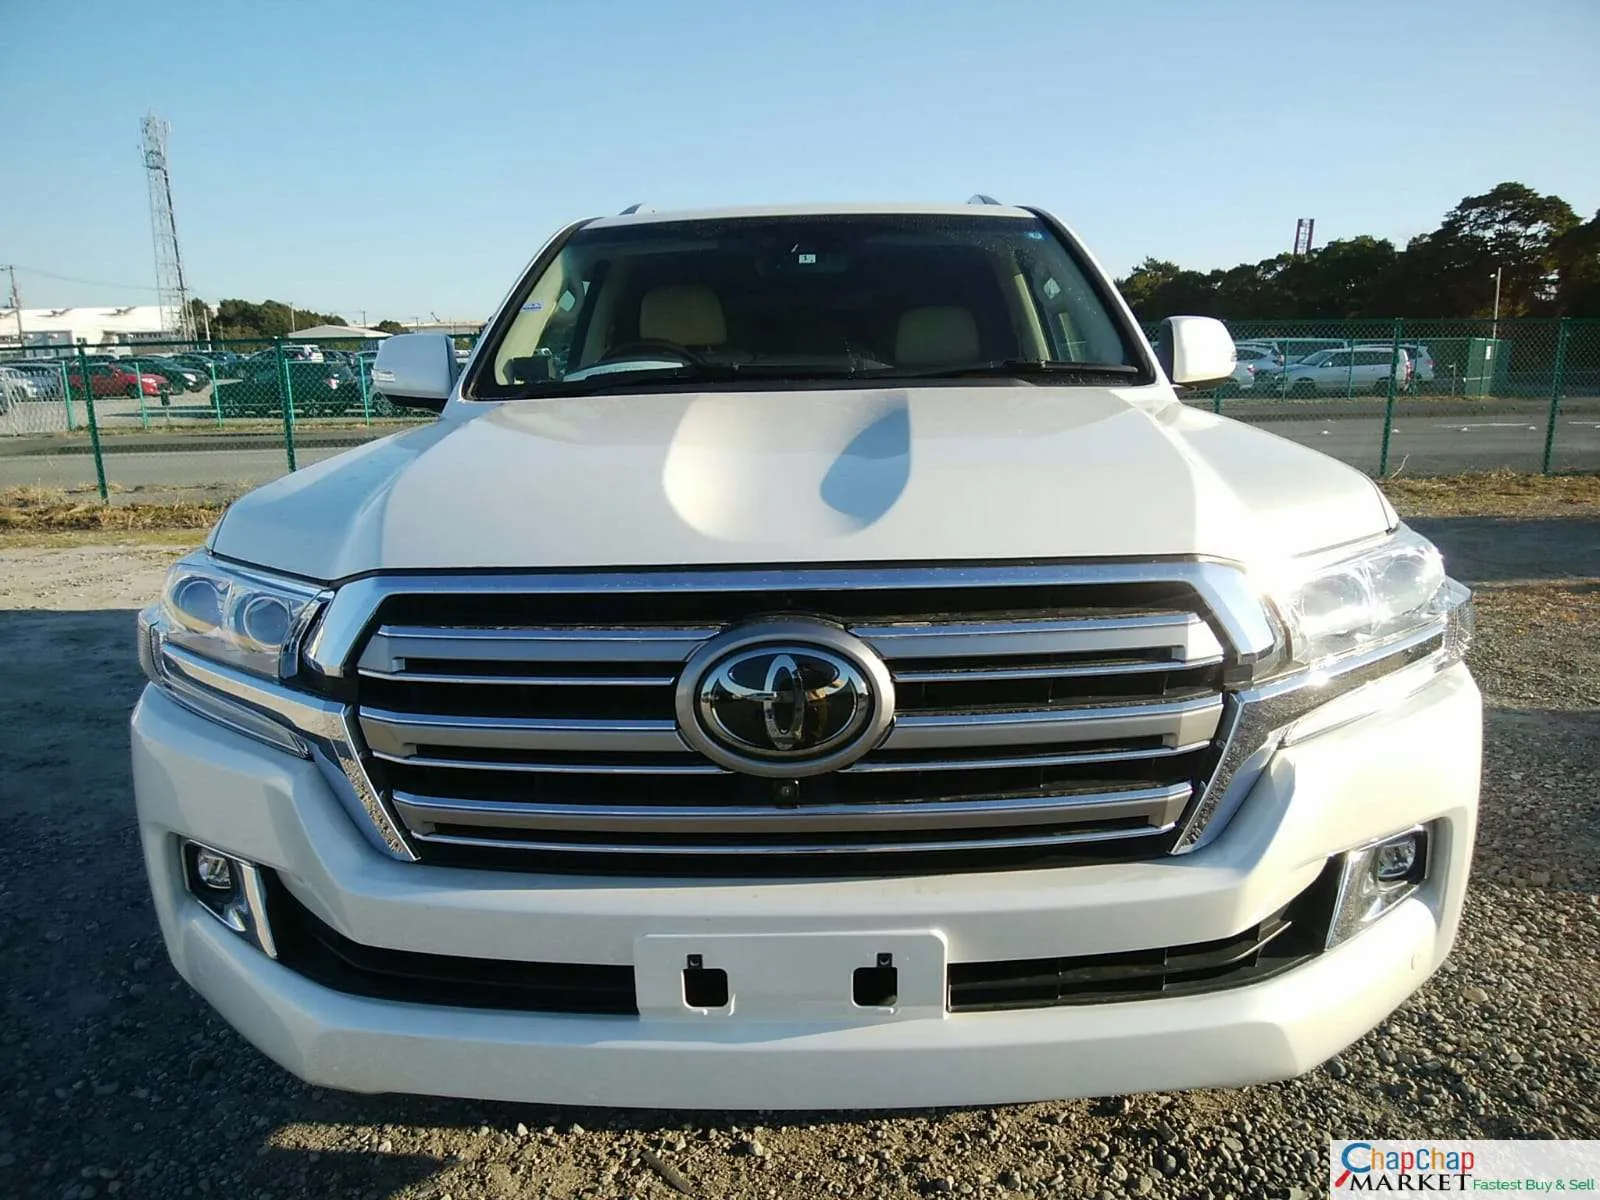 Toyota Land cruiser V8 ZX for sale in Kenya just arrived Cheapest sunroof leather exclusive